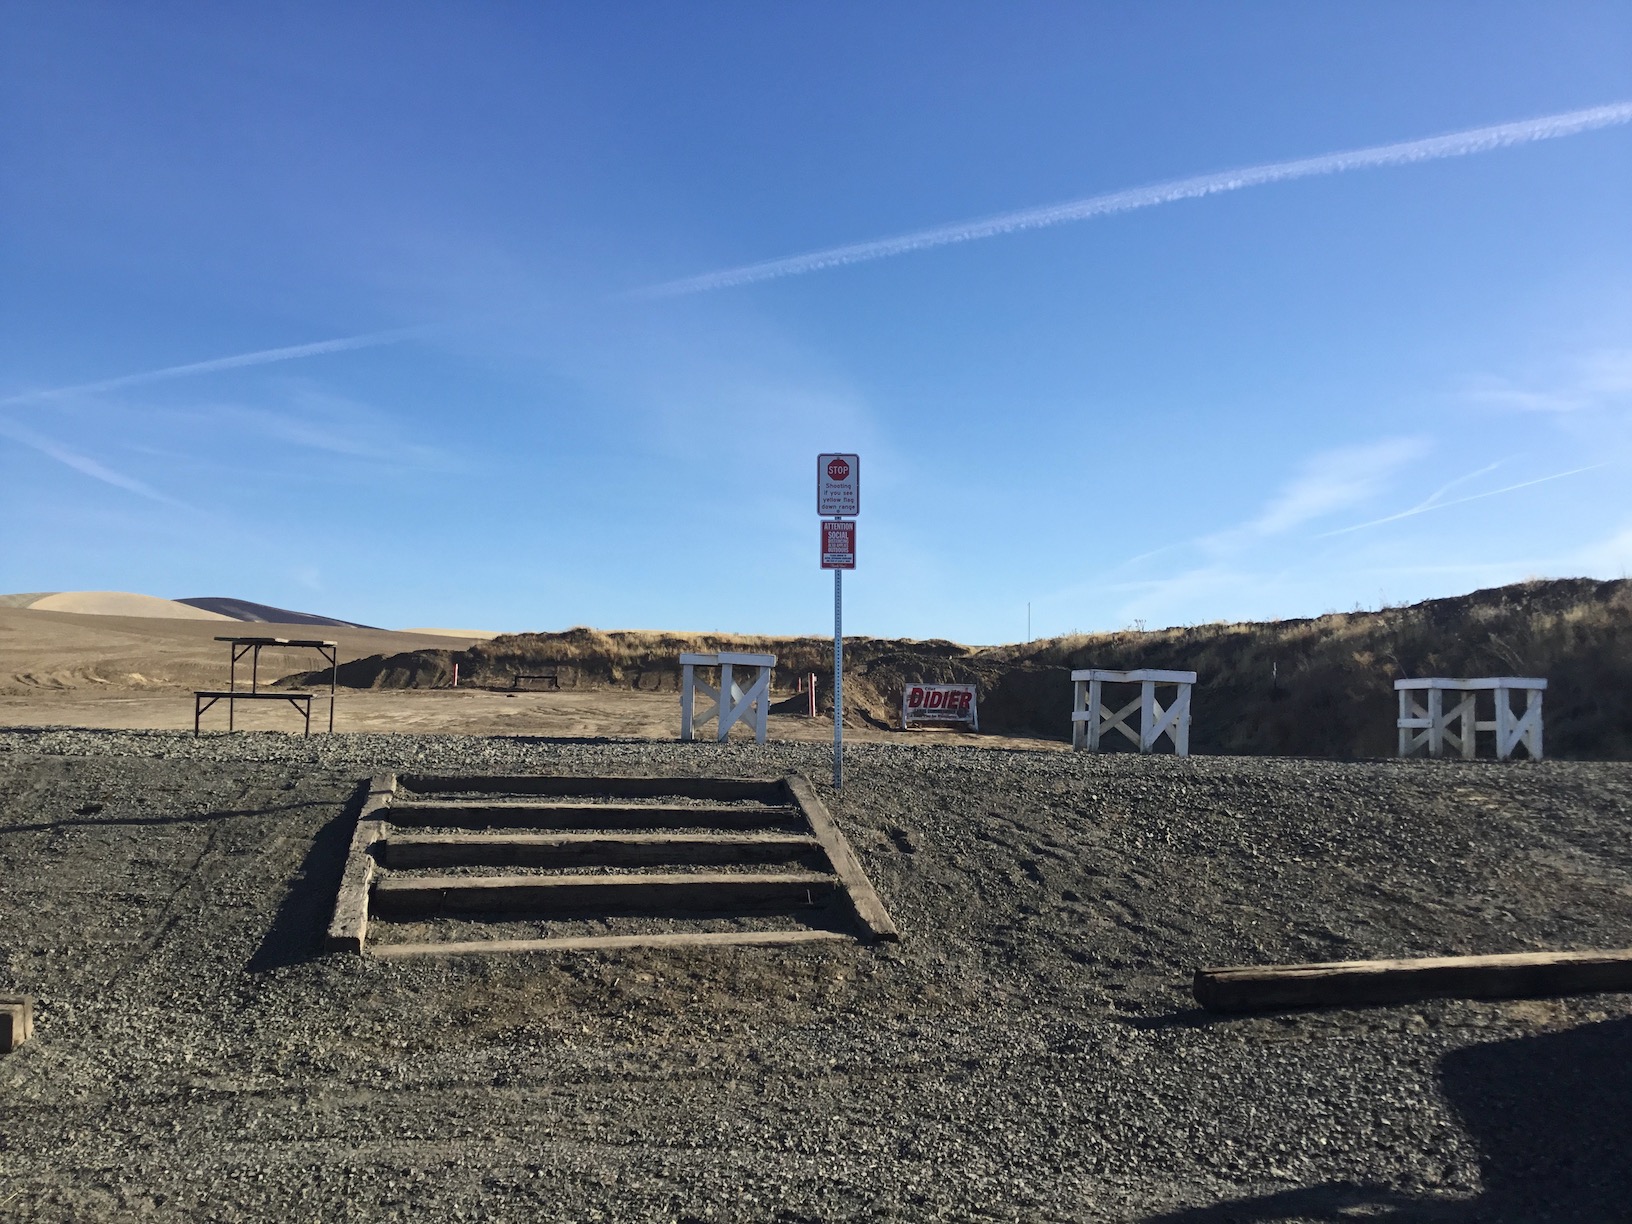 Primary access to new firing line